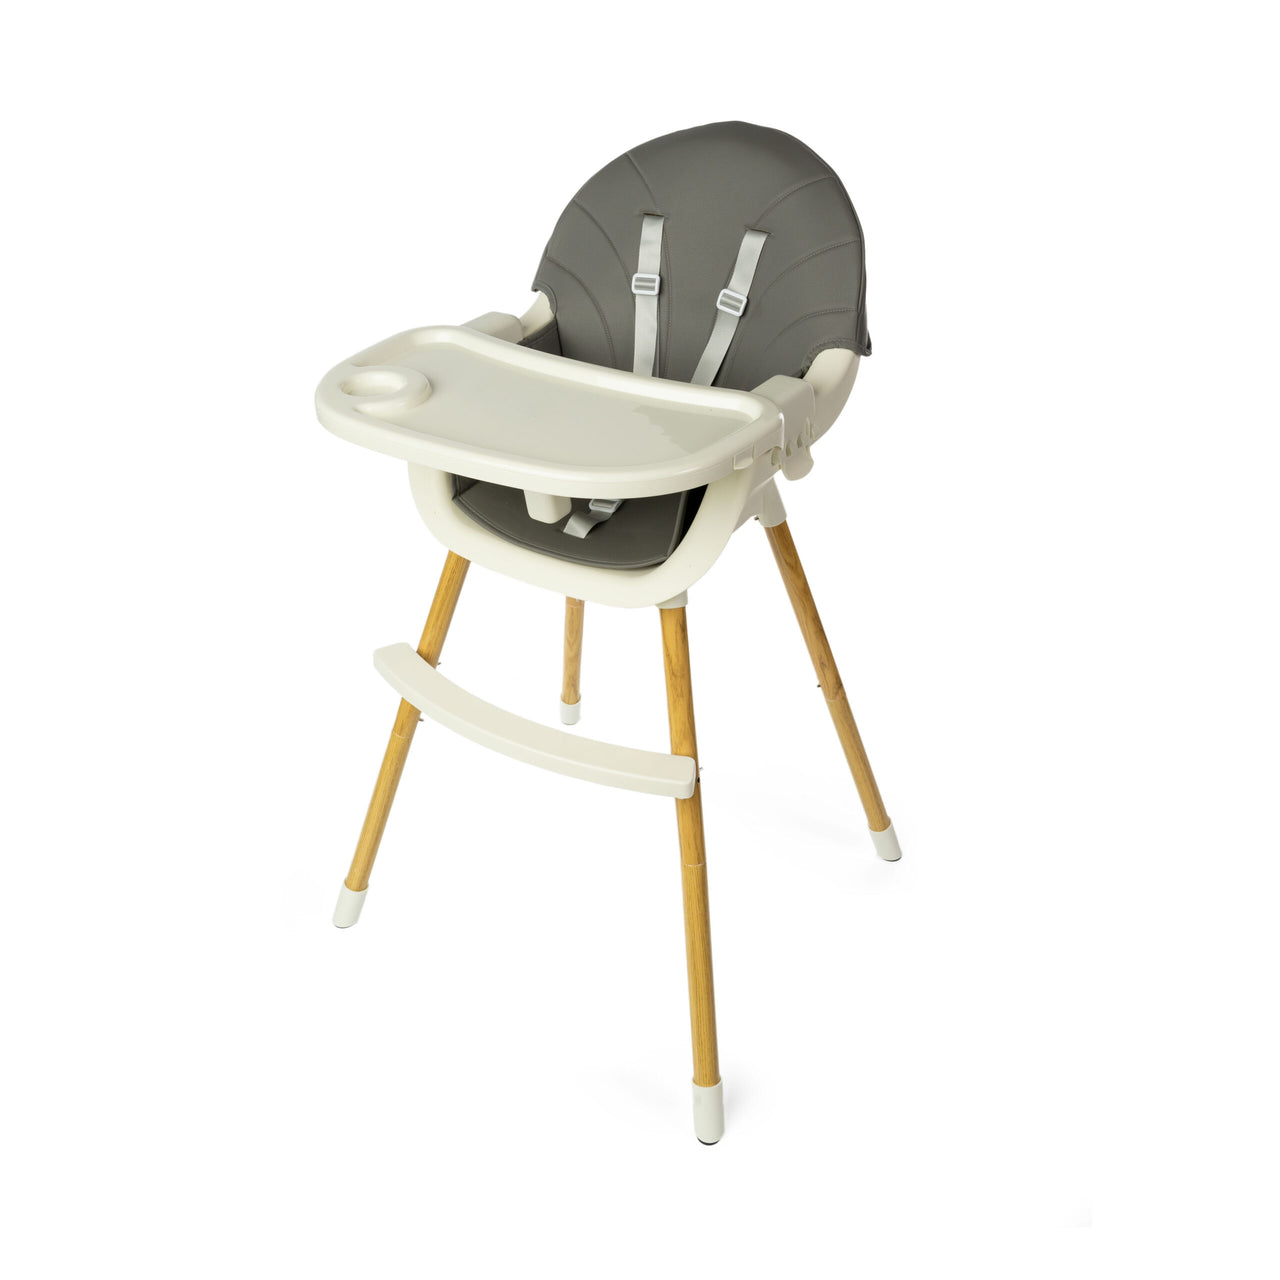 2-in-1 Convertible Baby High Feeding Chair with Tray - Grey